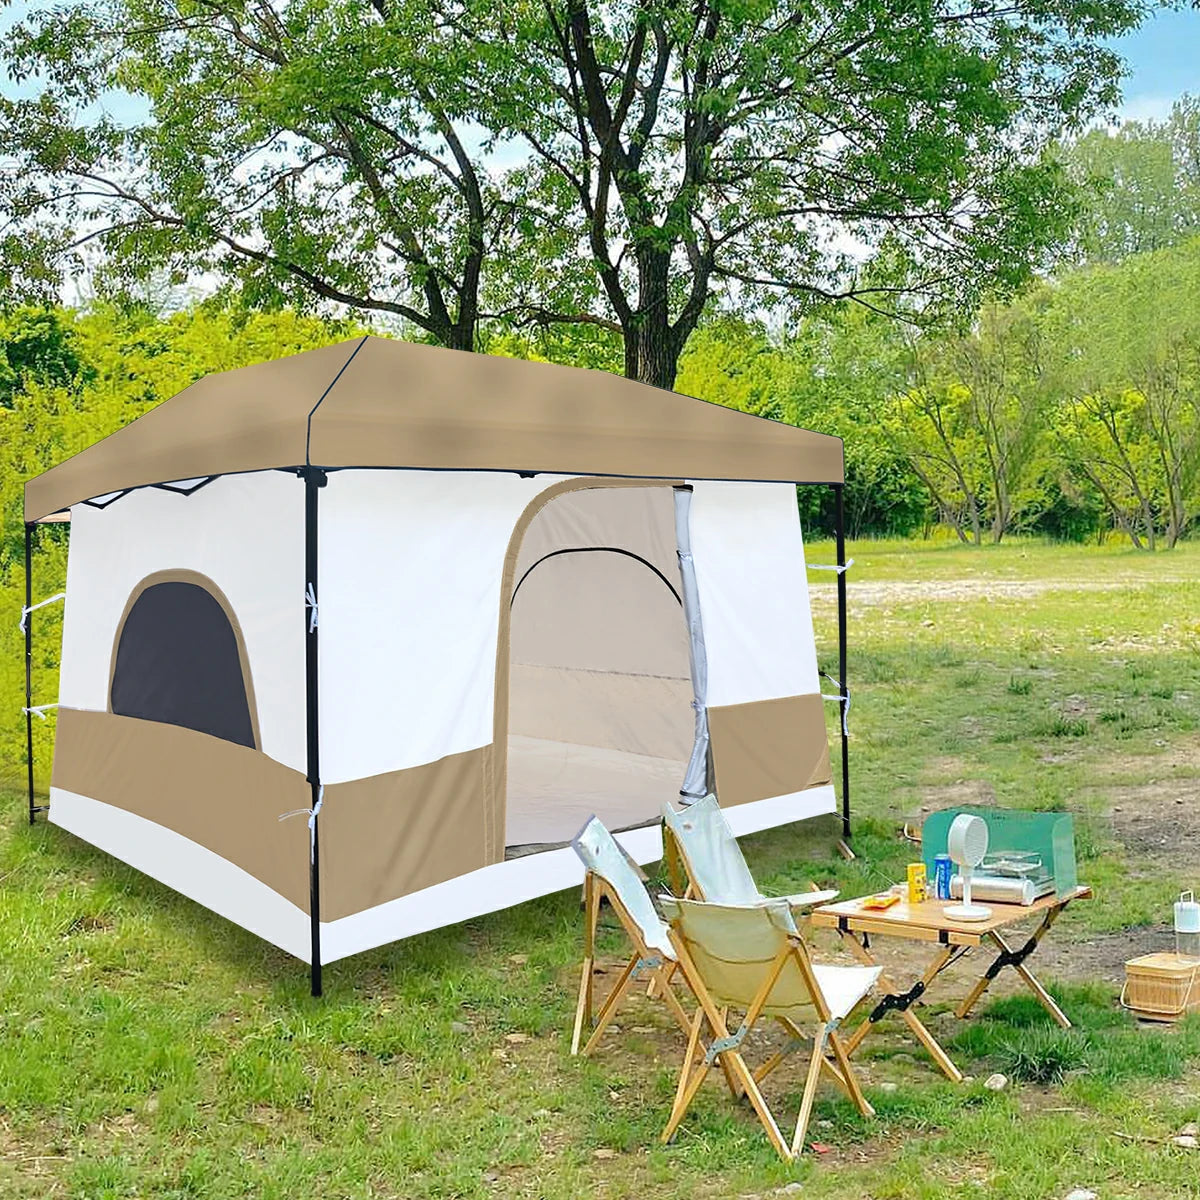 10'x10' Camping Cube Tent for Pop Up Canopy (Canopy & Frame NOT Included)